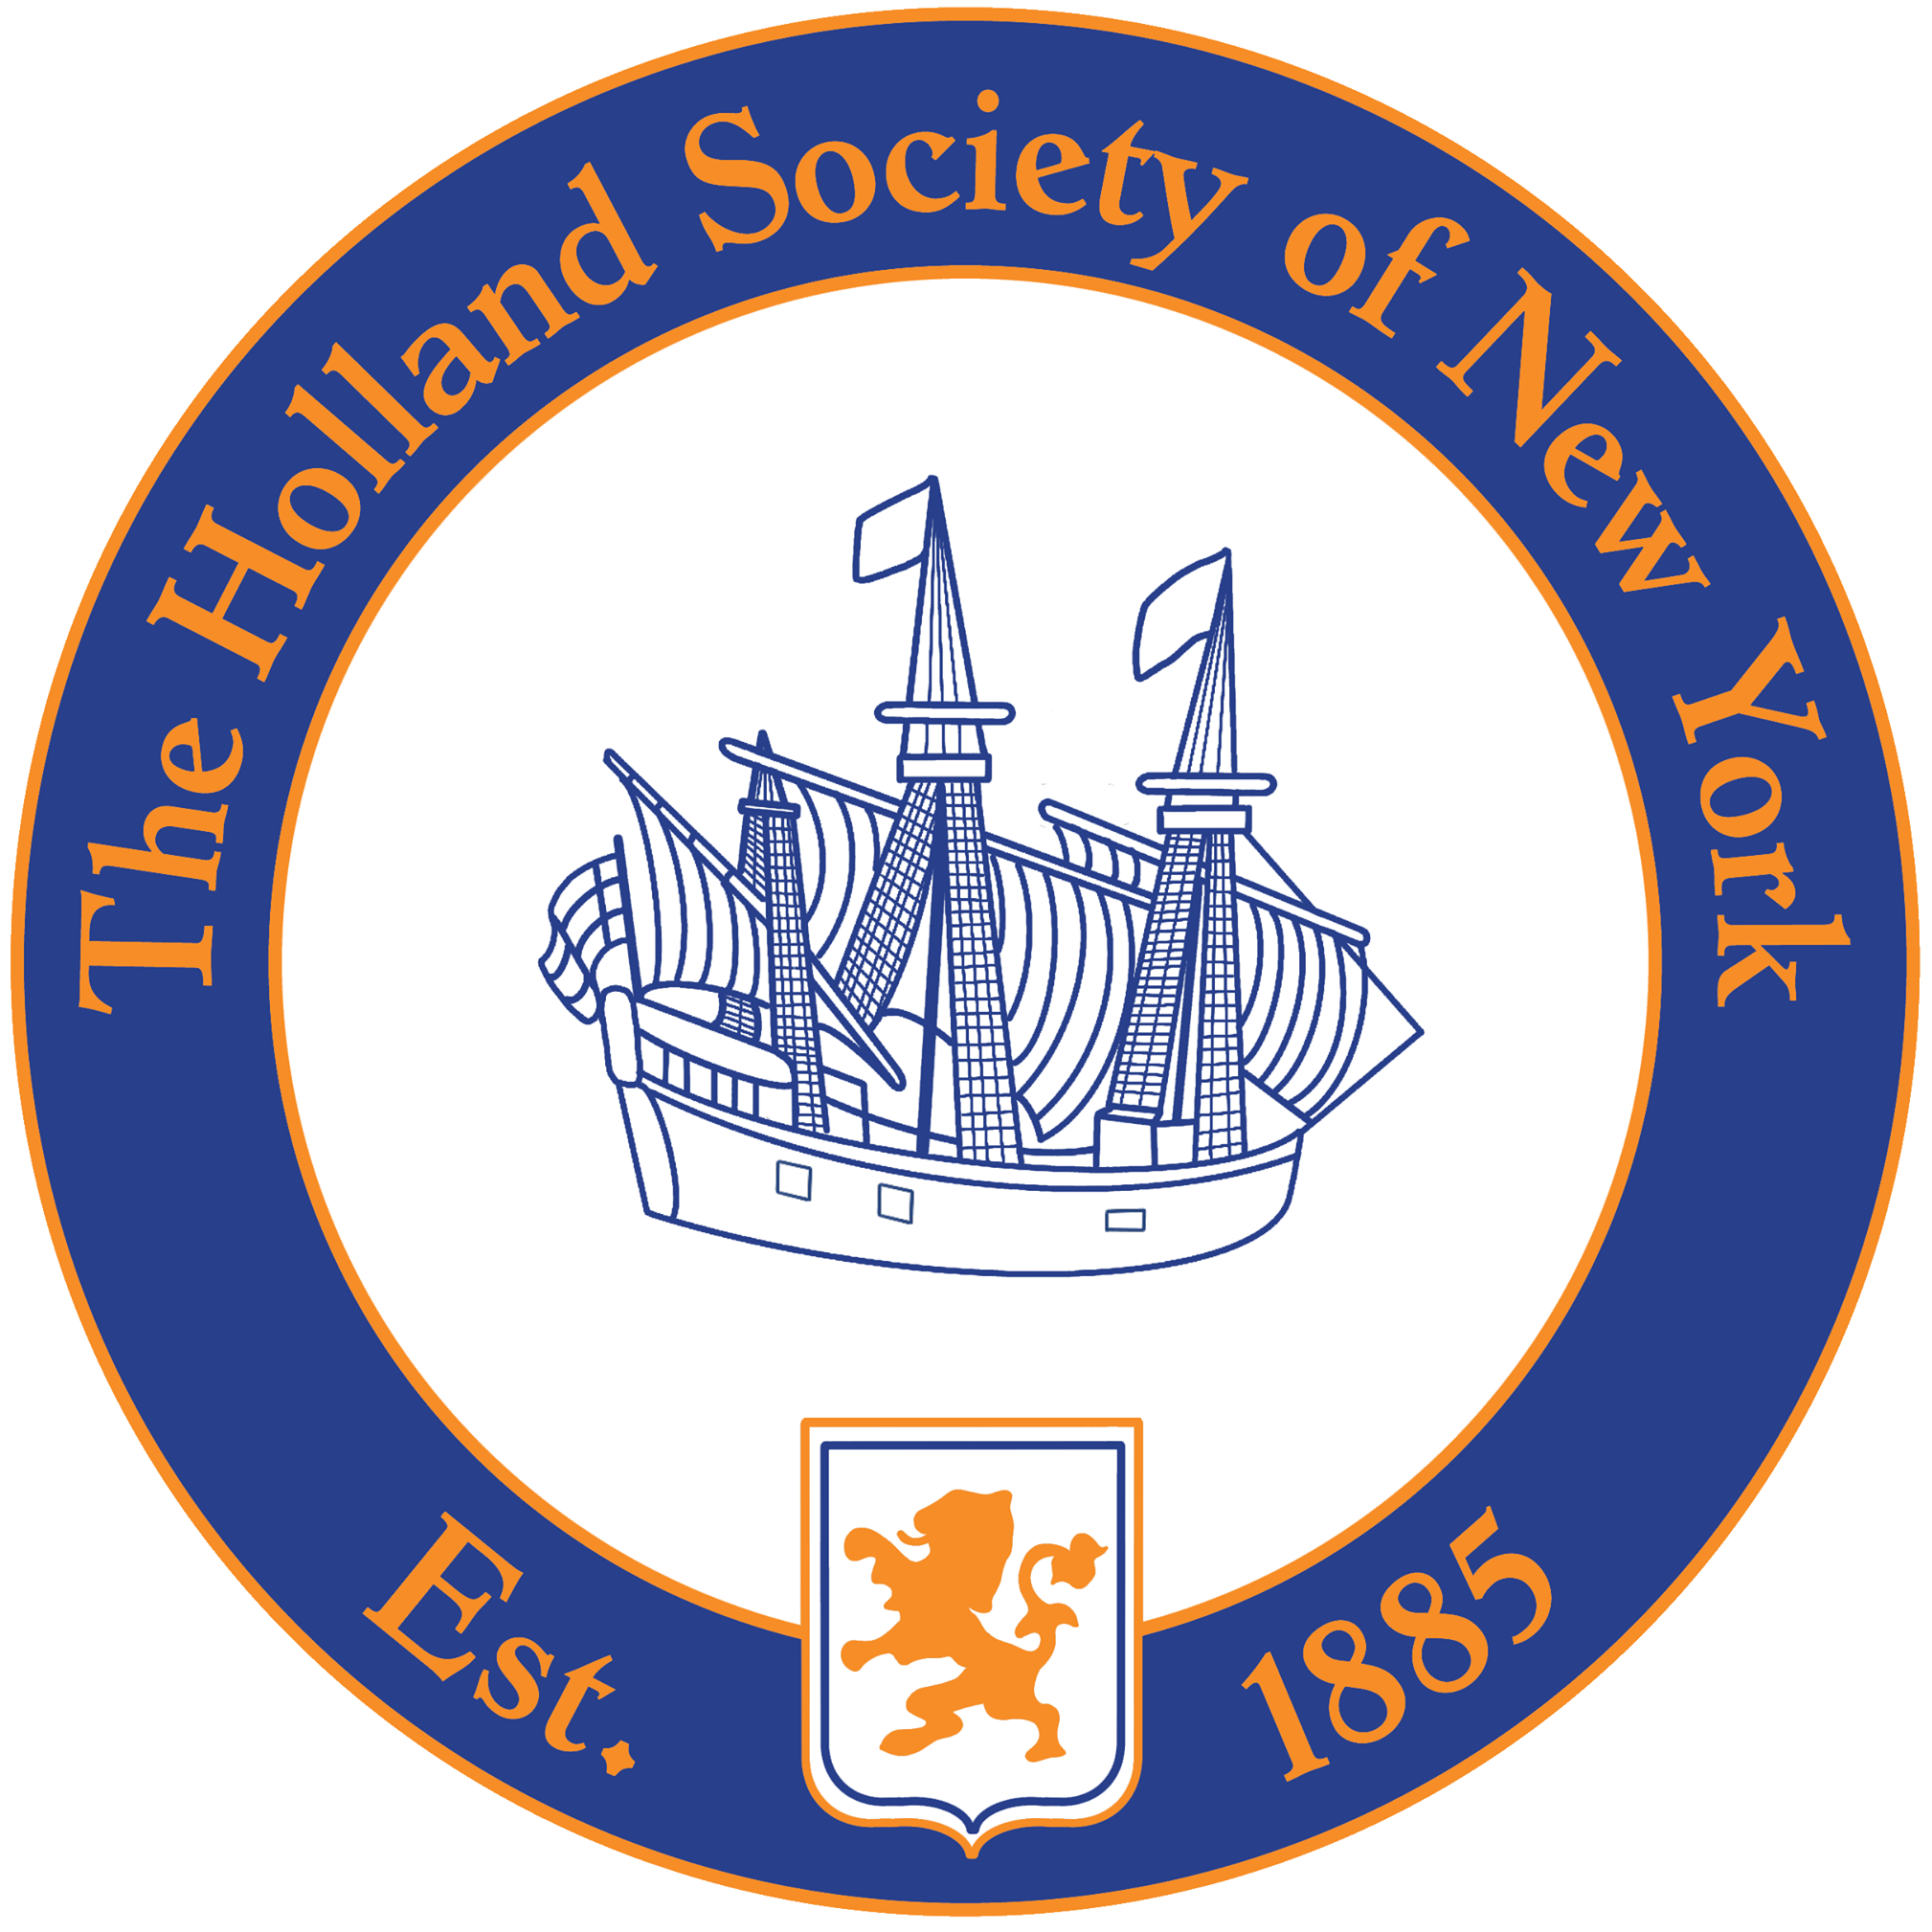 Dutch Cultural Organizations in New York New York - The Holland Society of New York